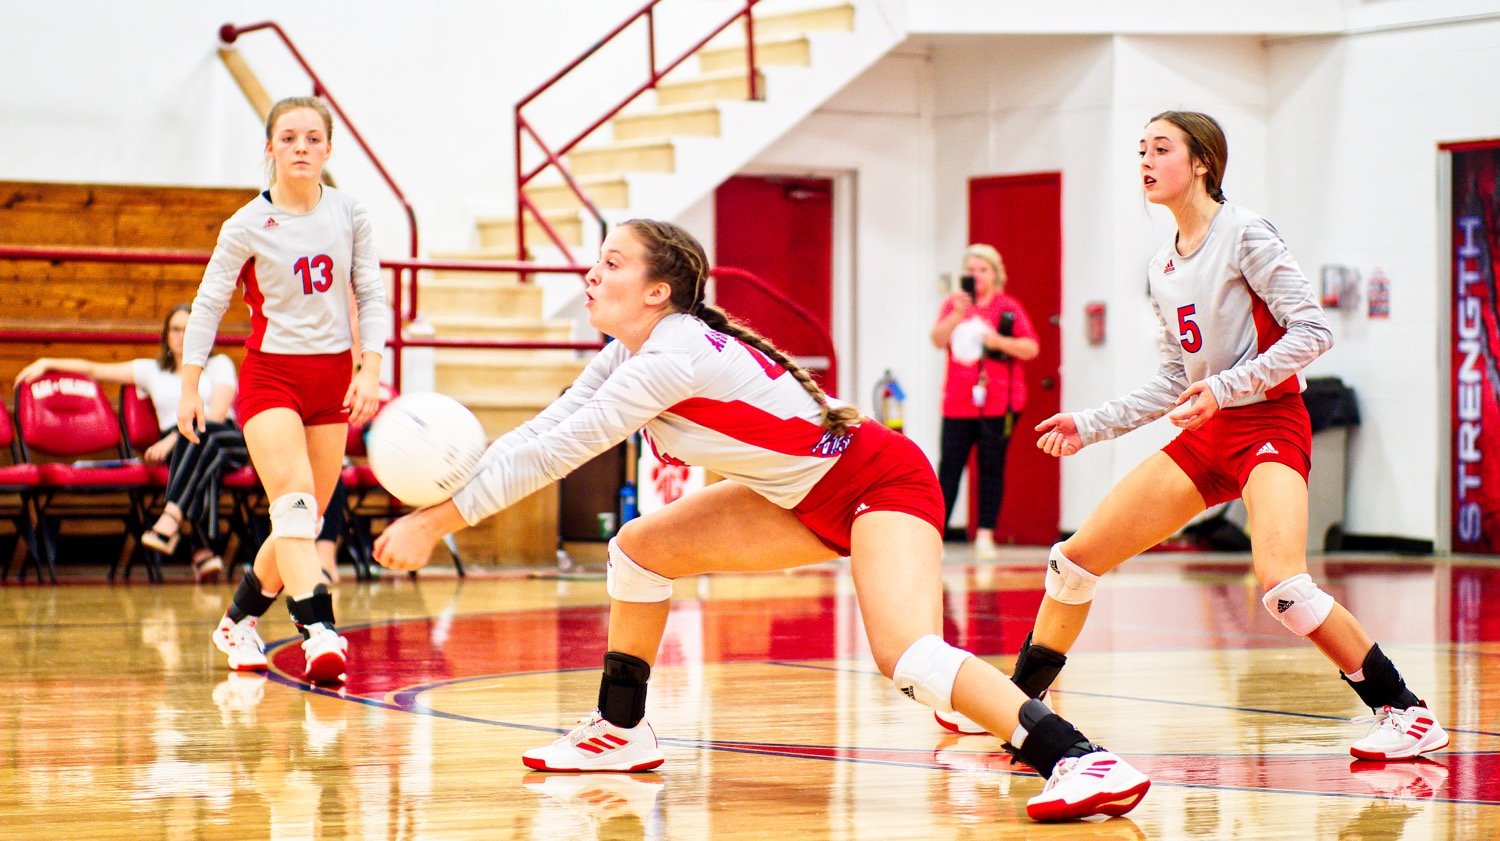 Skyler West gets low on defense as Cacie Lennon and Kamrin Wright await action at home Sept. 28 against Como-Pickton. [more from that match] West was named to second team all-district and earned academic all-district honors.